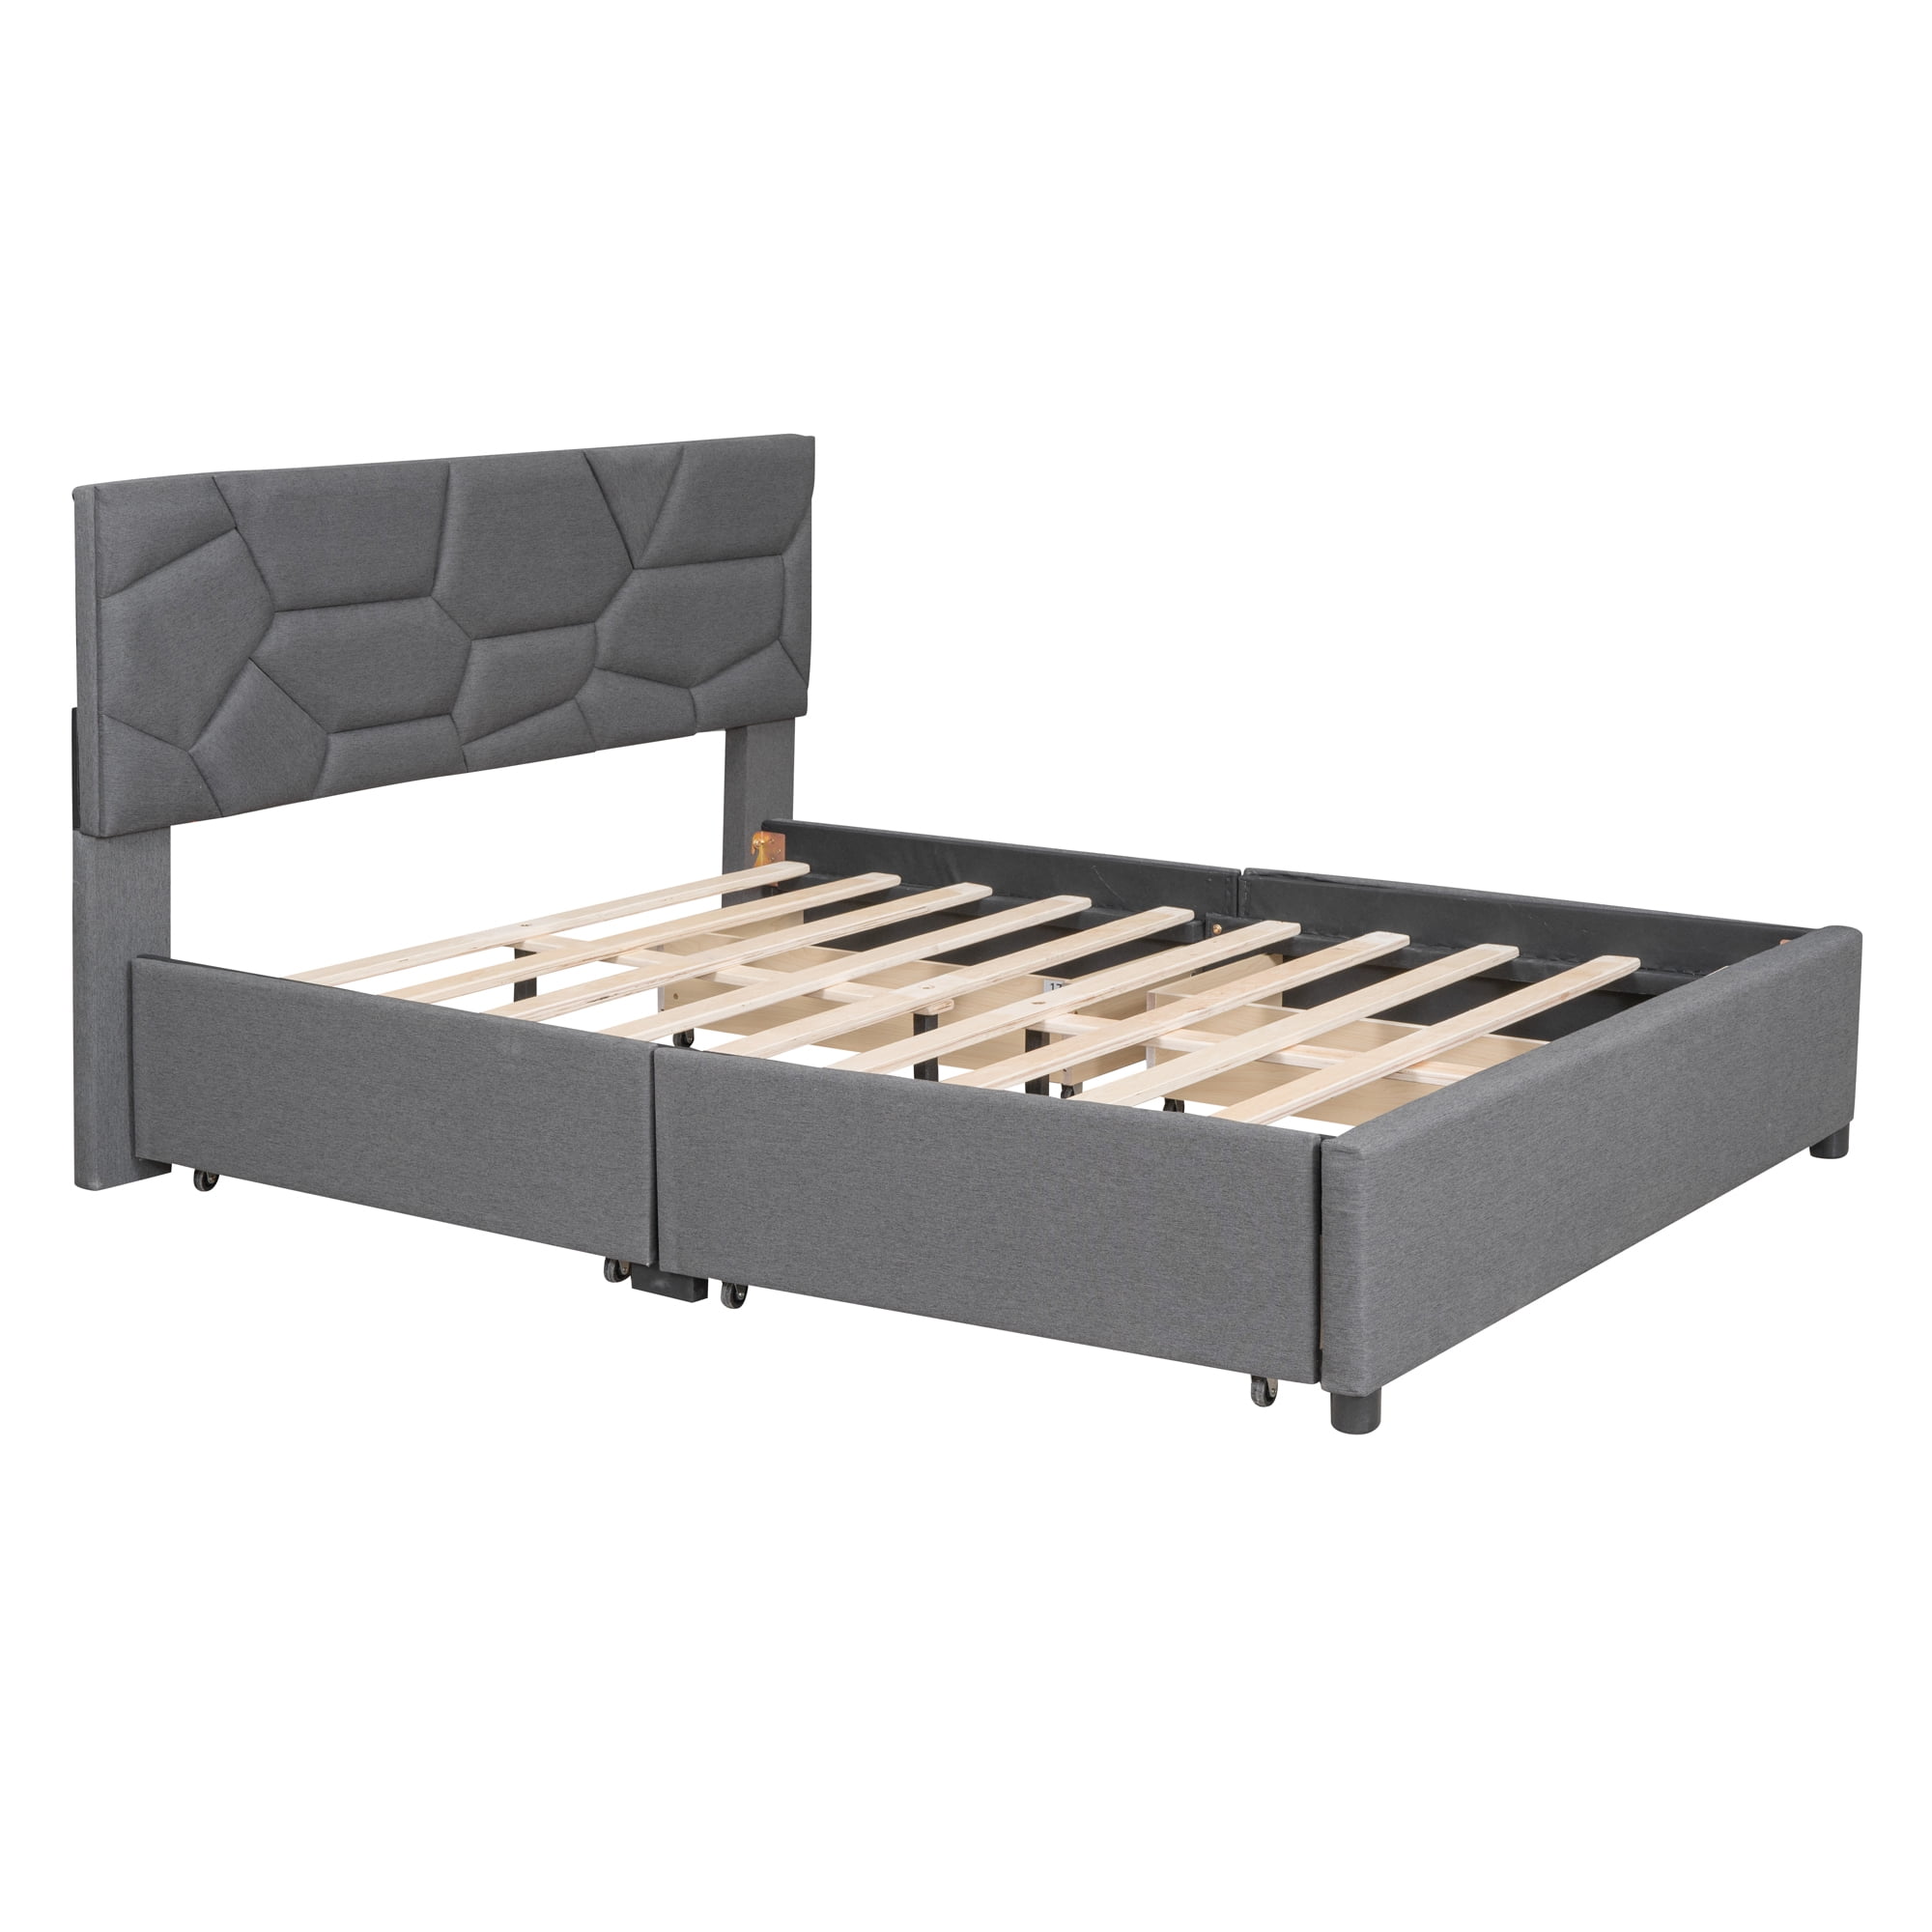 Full Size Storage Bed with 4 Drawers, BTMWAY Full Size Upholstered Platform  Bed with Headboard Brick Pattern for Bedroom, Contemporary Storage Full 